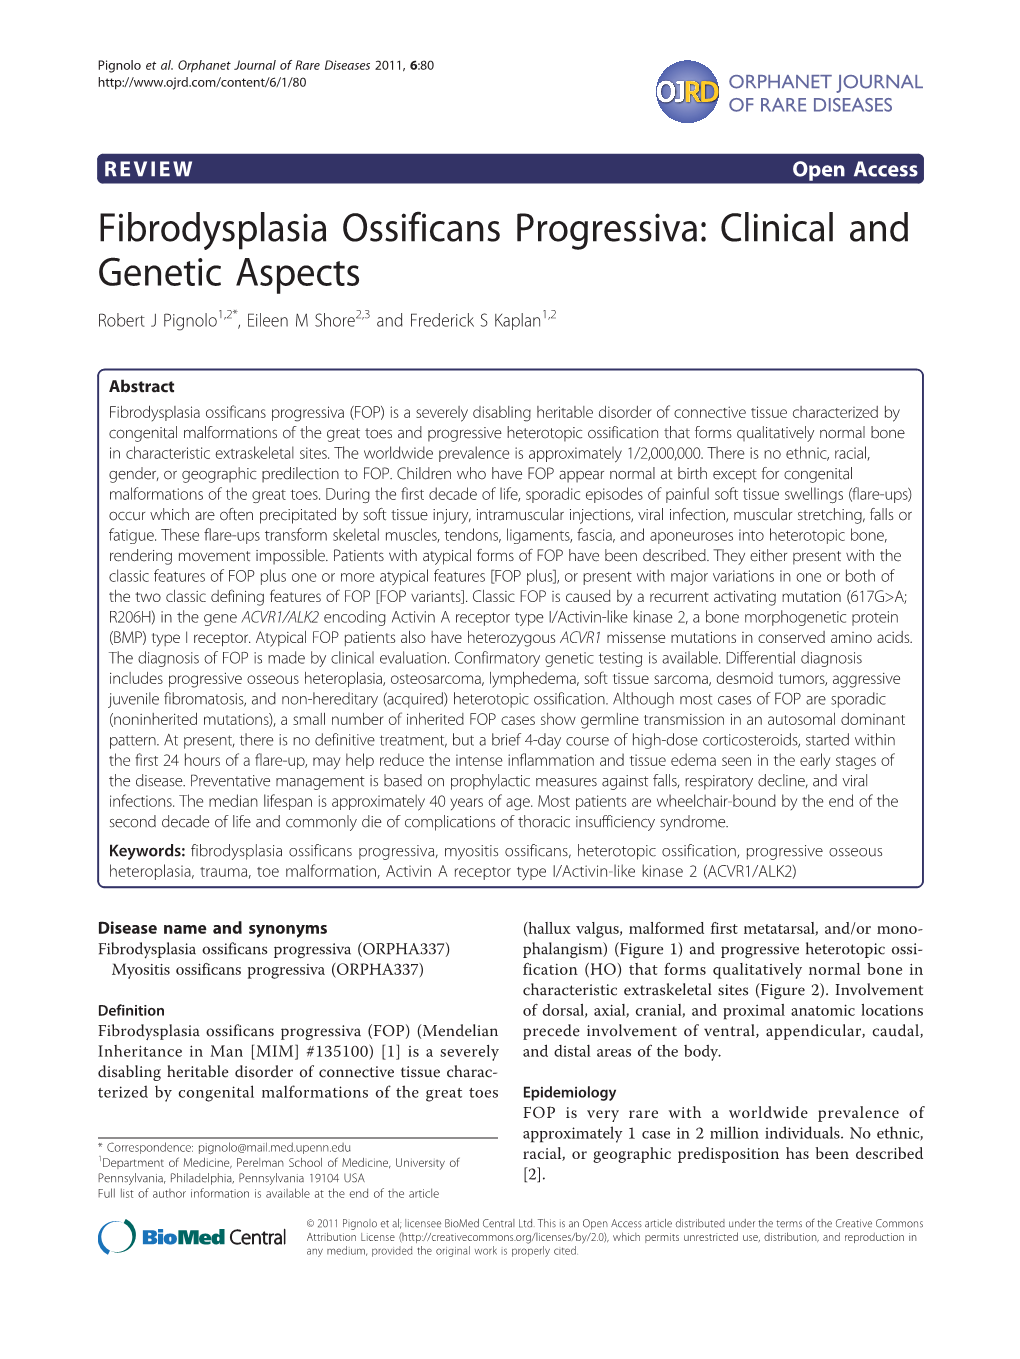 Fibrodysplasia Ossificans Progressiva: Clinical and Genetic Aspects Robert J Pignolo1,2*, Eileen M Shore2,3 and Frederick S Kaplan1,2